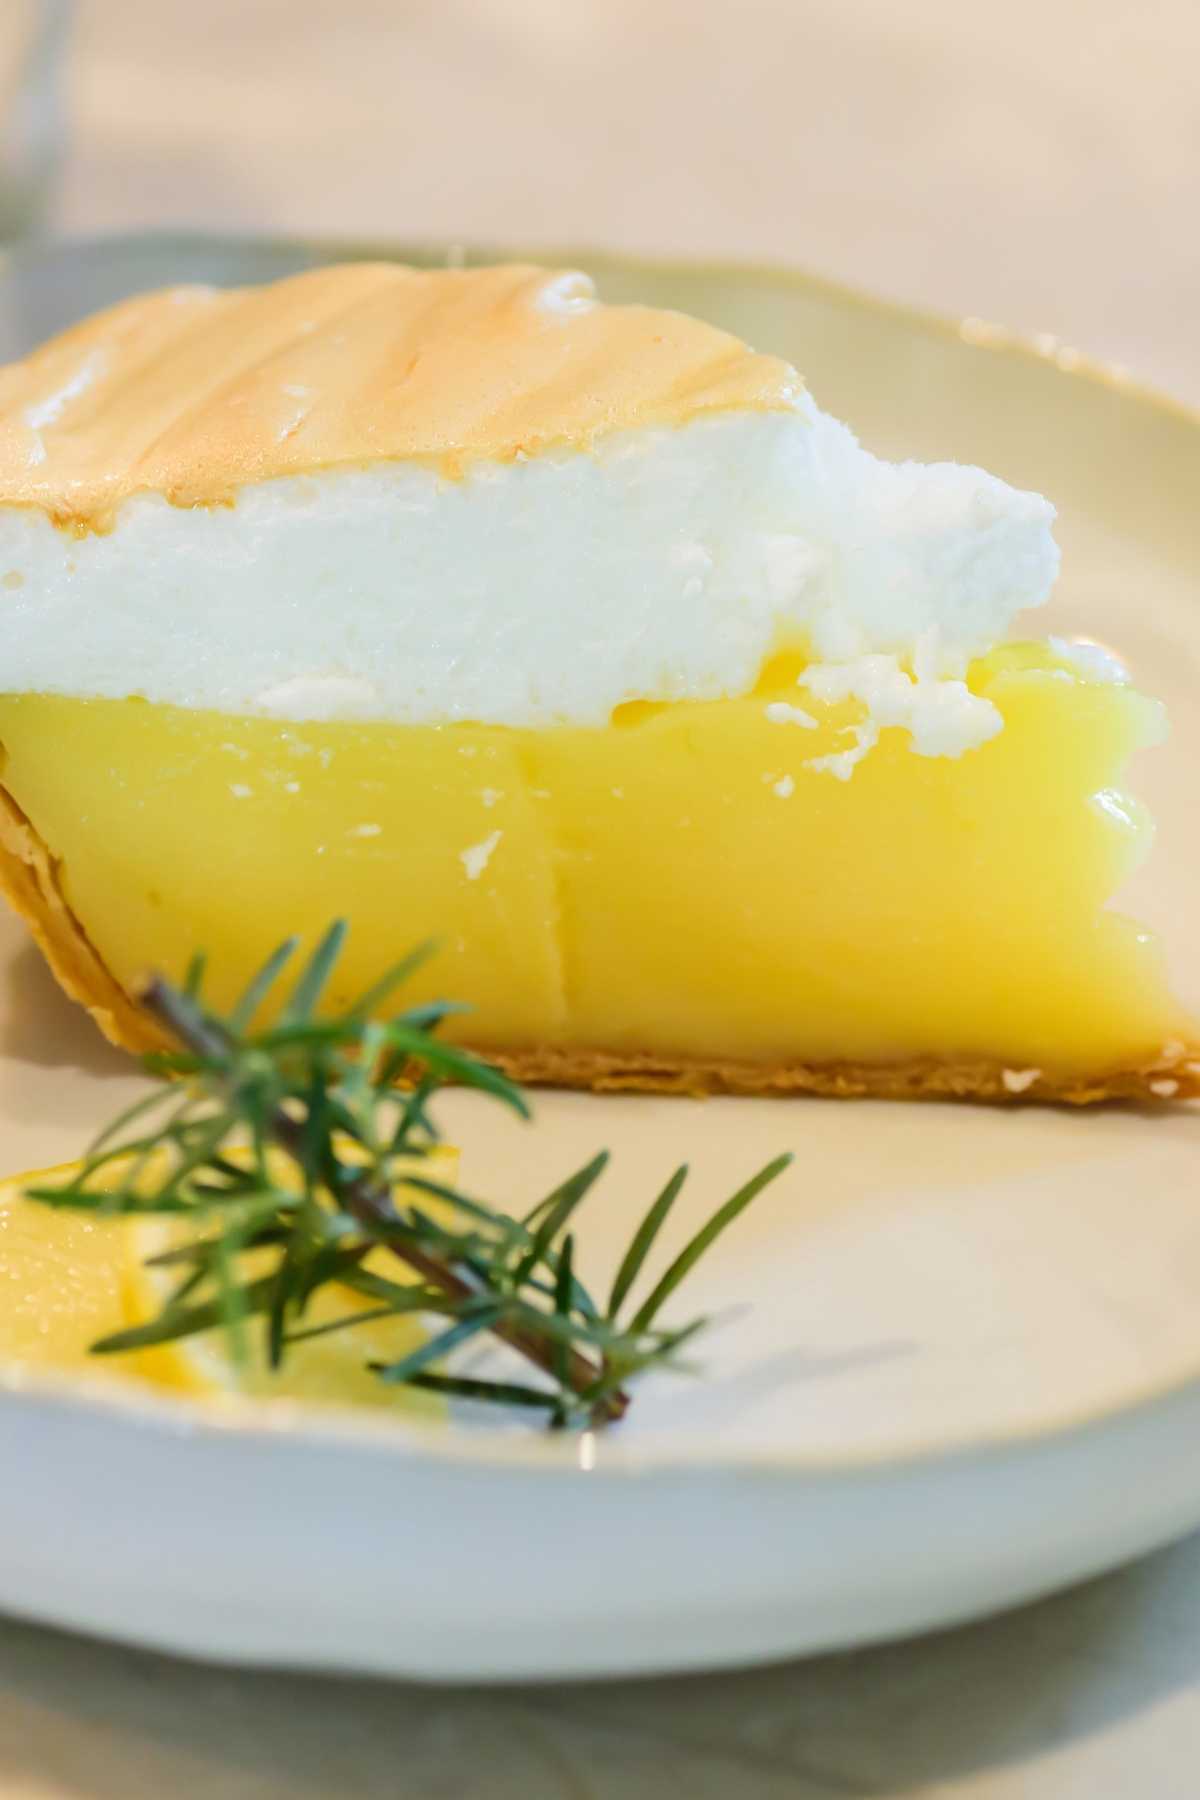 Lemon pie filling is one of the best things about lemon meringue pie! It’s tart, tangy, and just sweet enough.